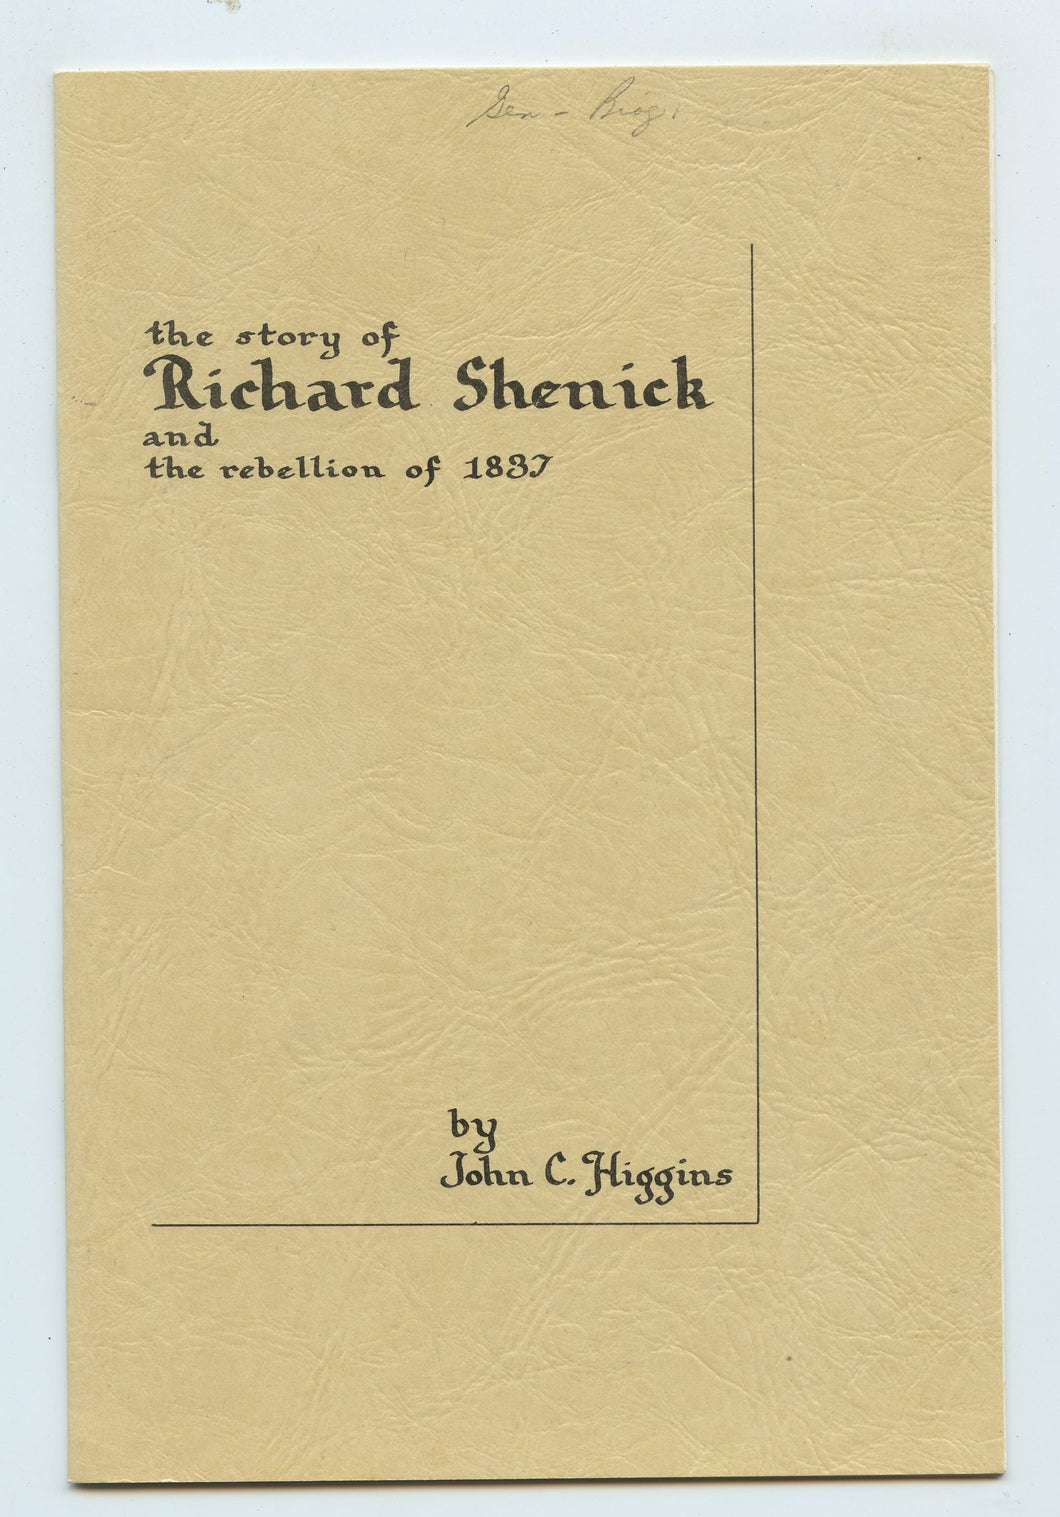 the story of Richard Shenick and the rebellion of 1837